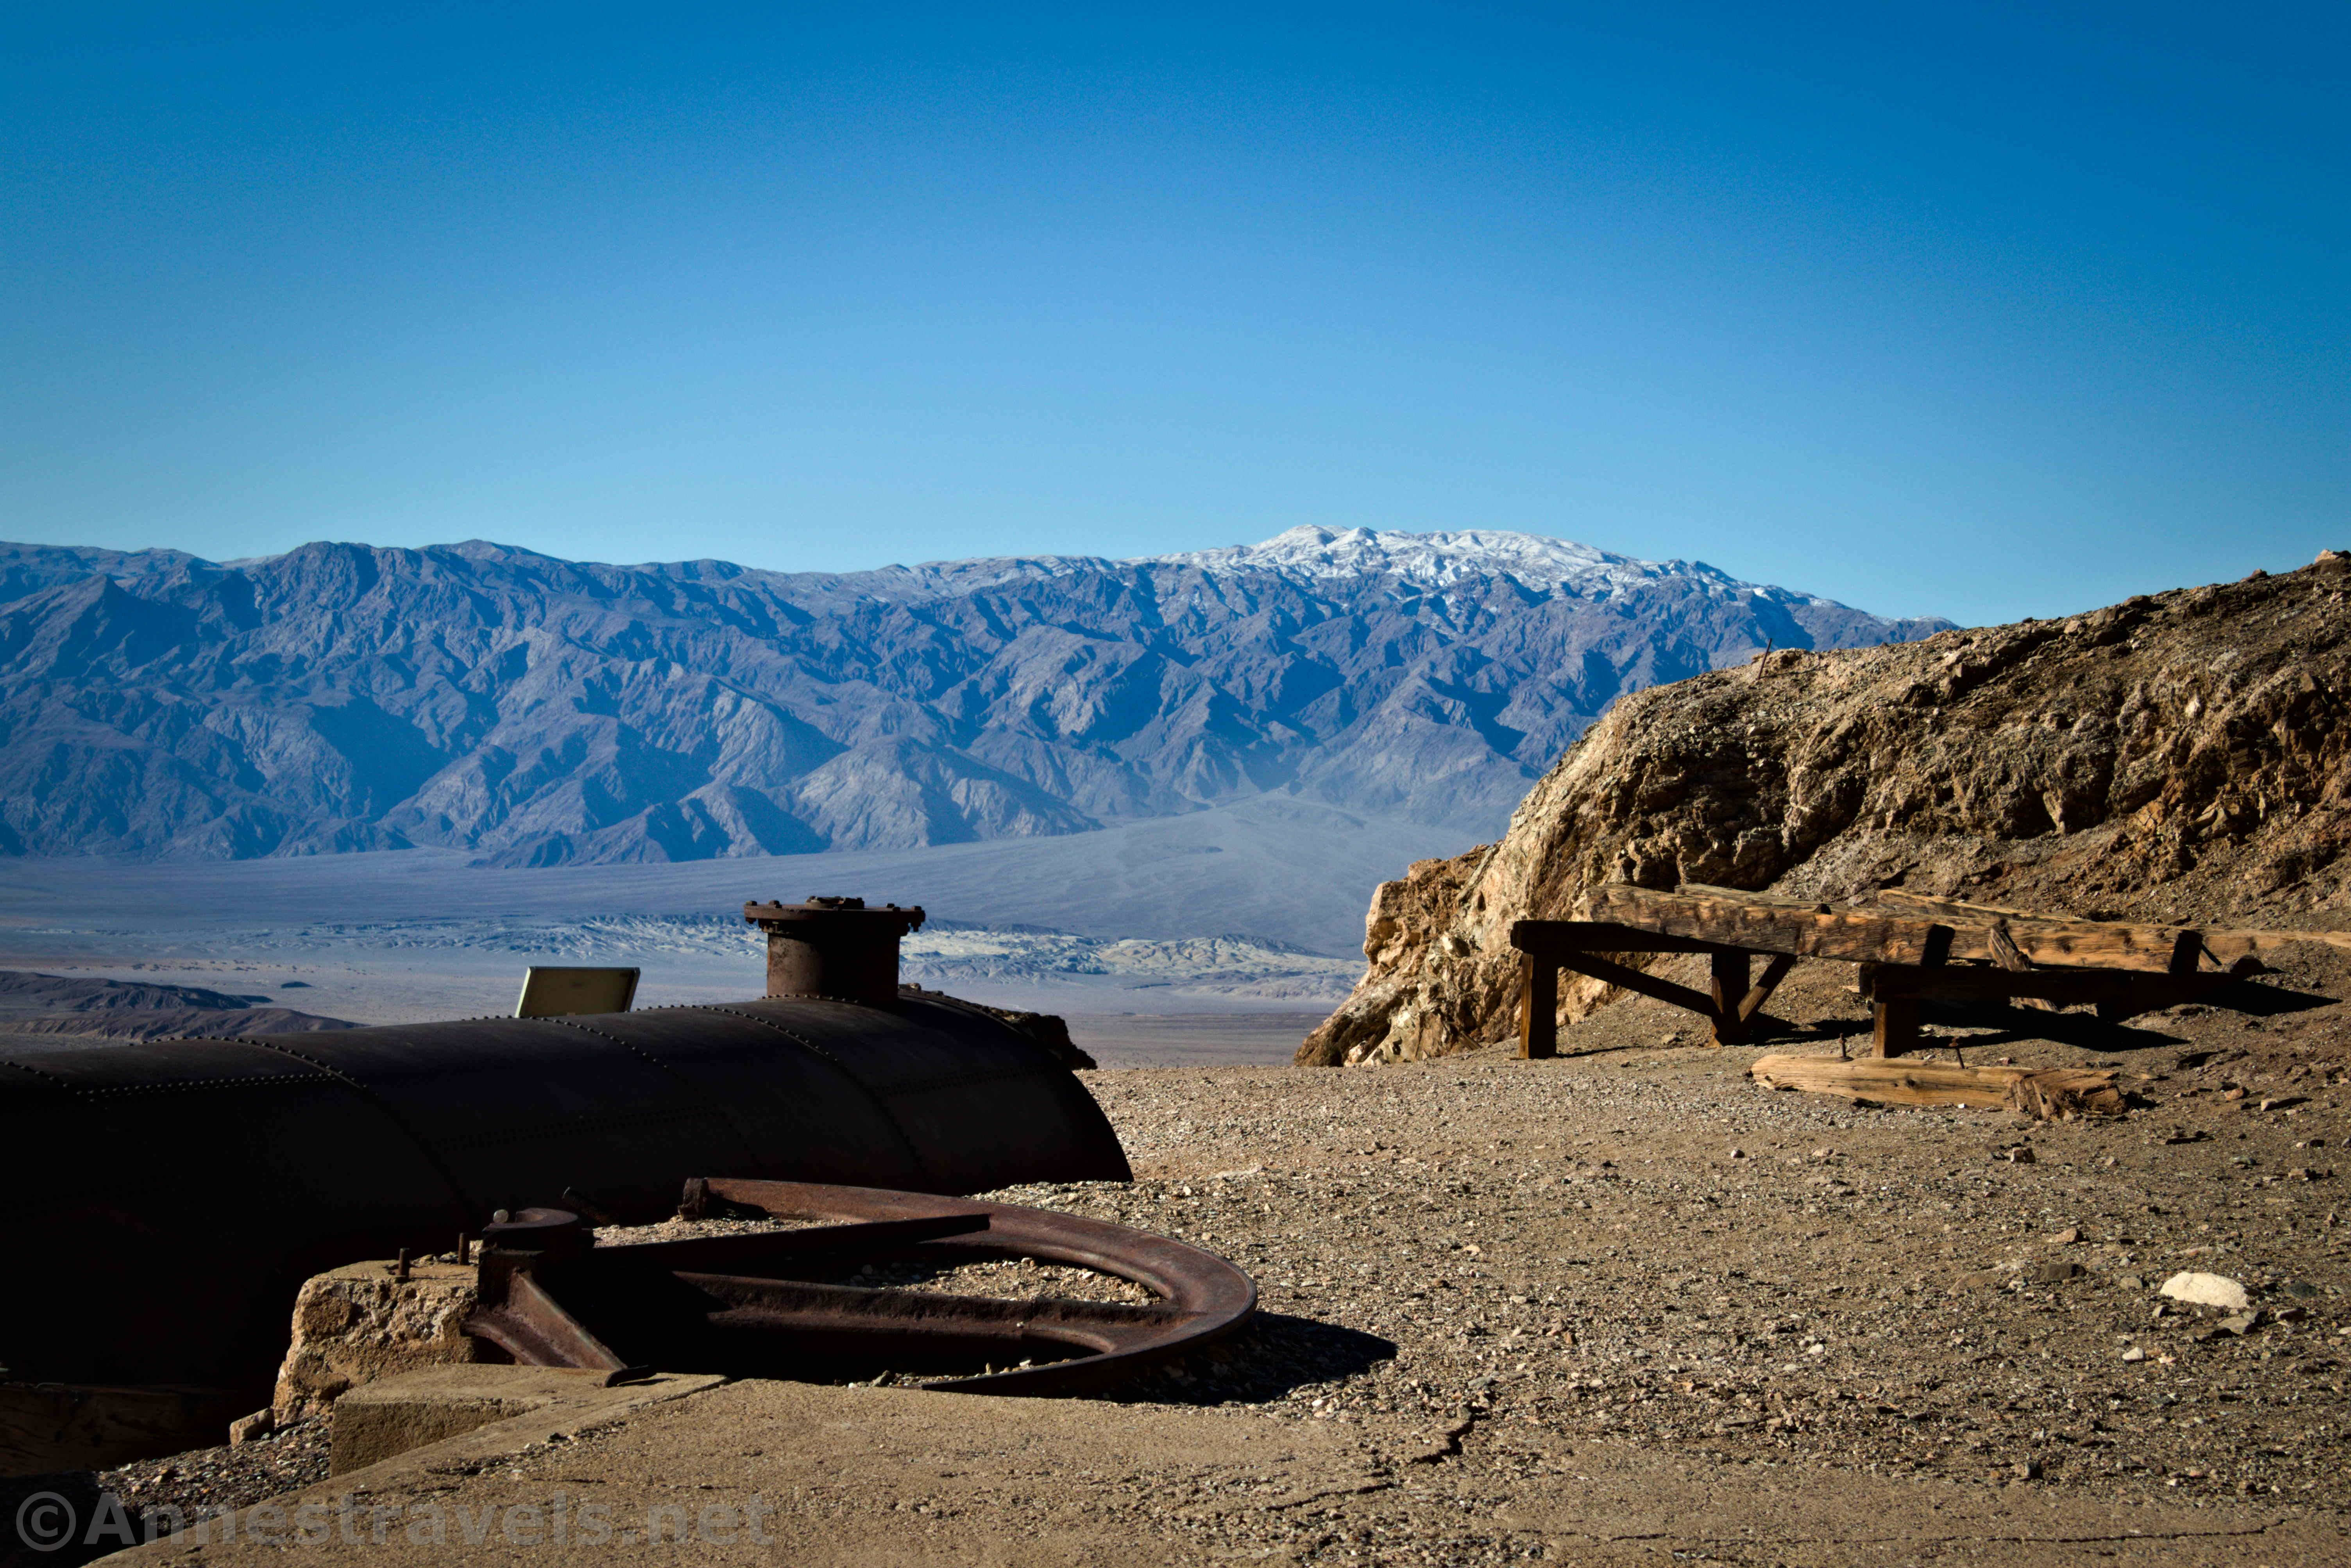 An old tank at the Keane Wonder Mind, Death Valley National Park, California